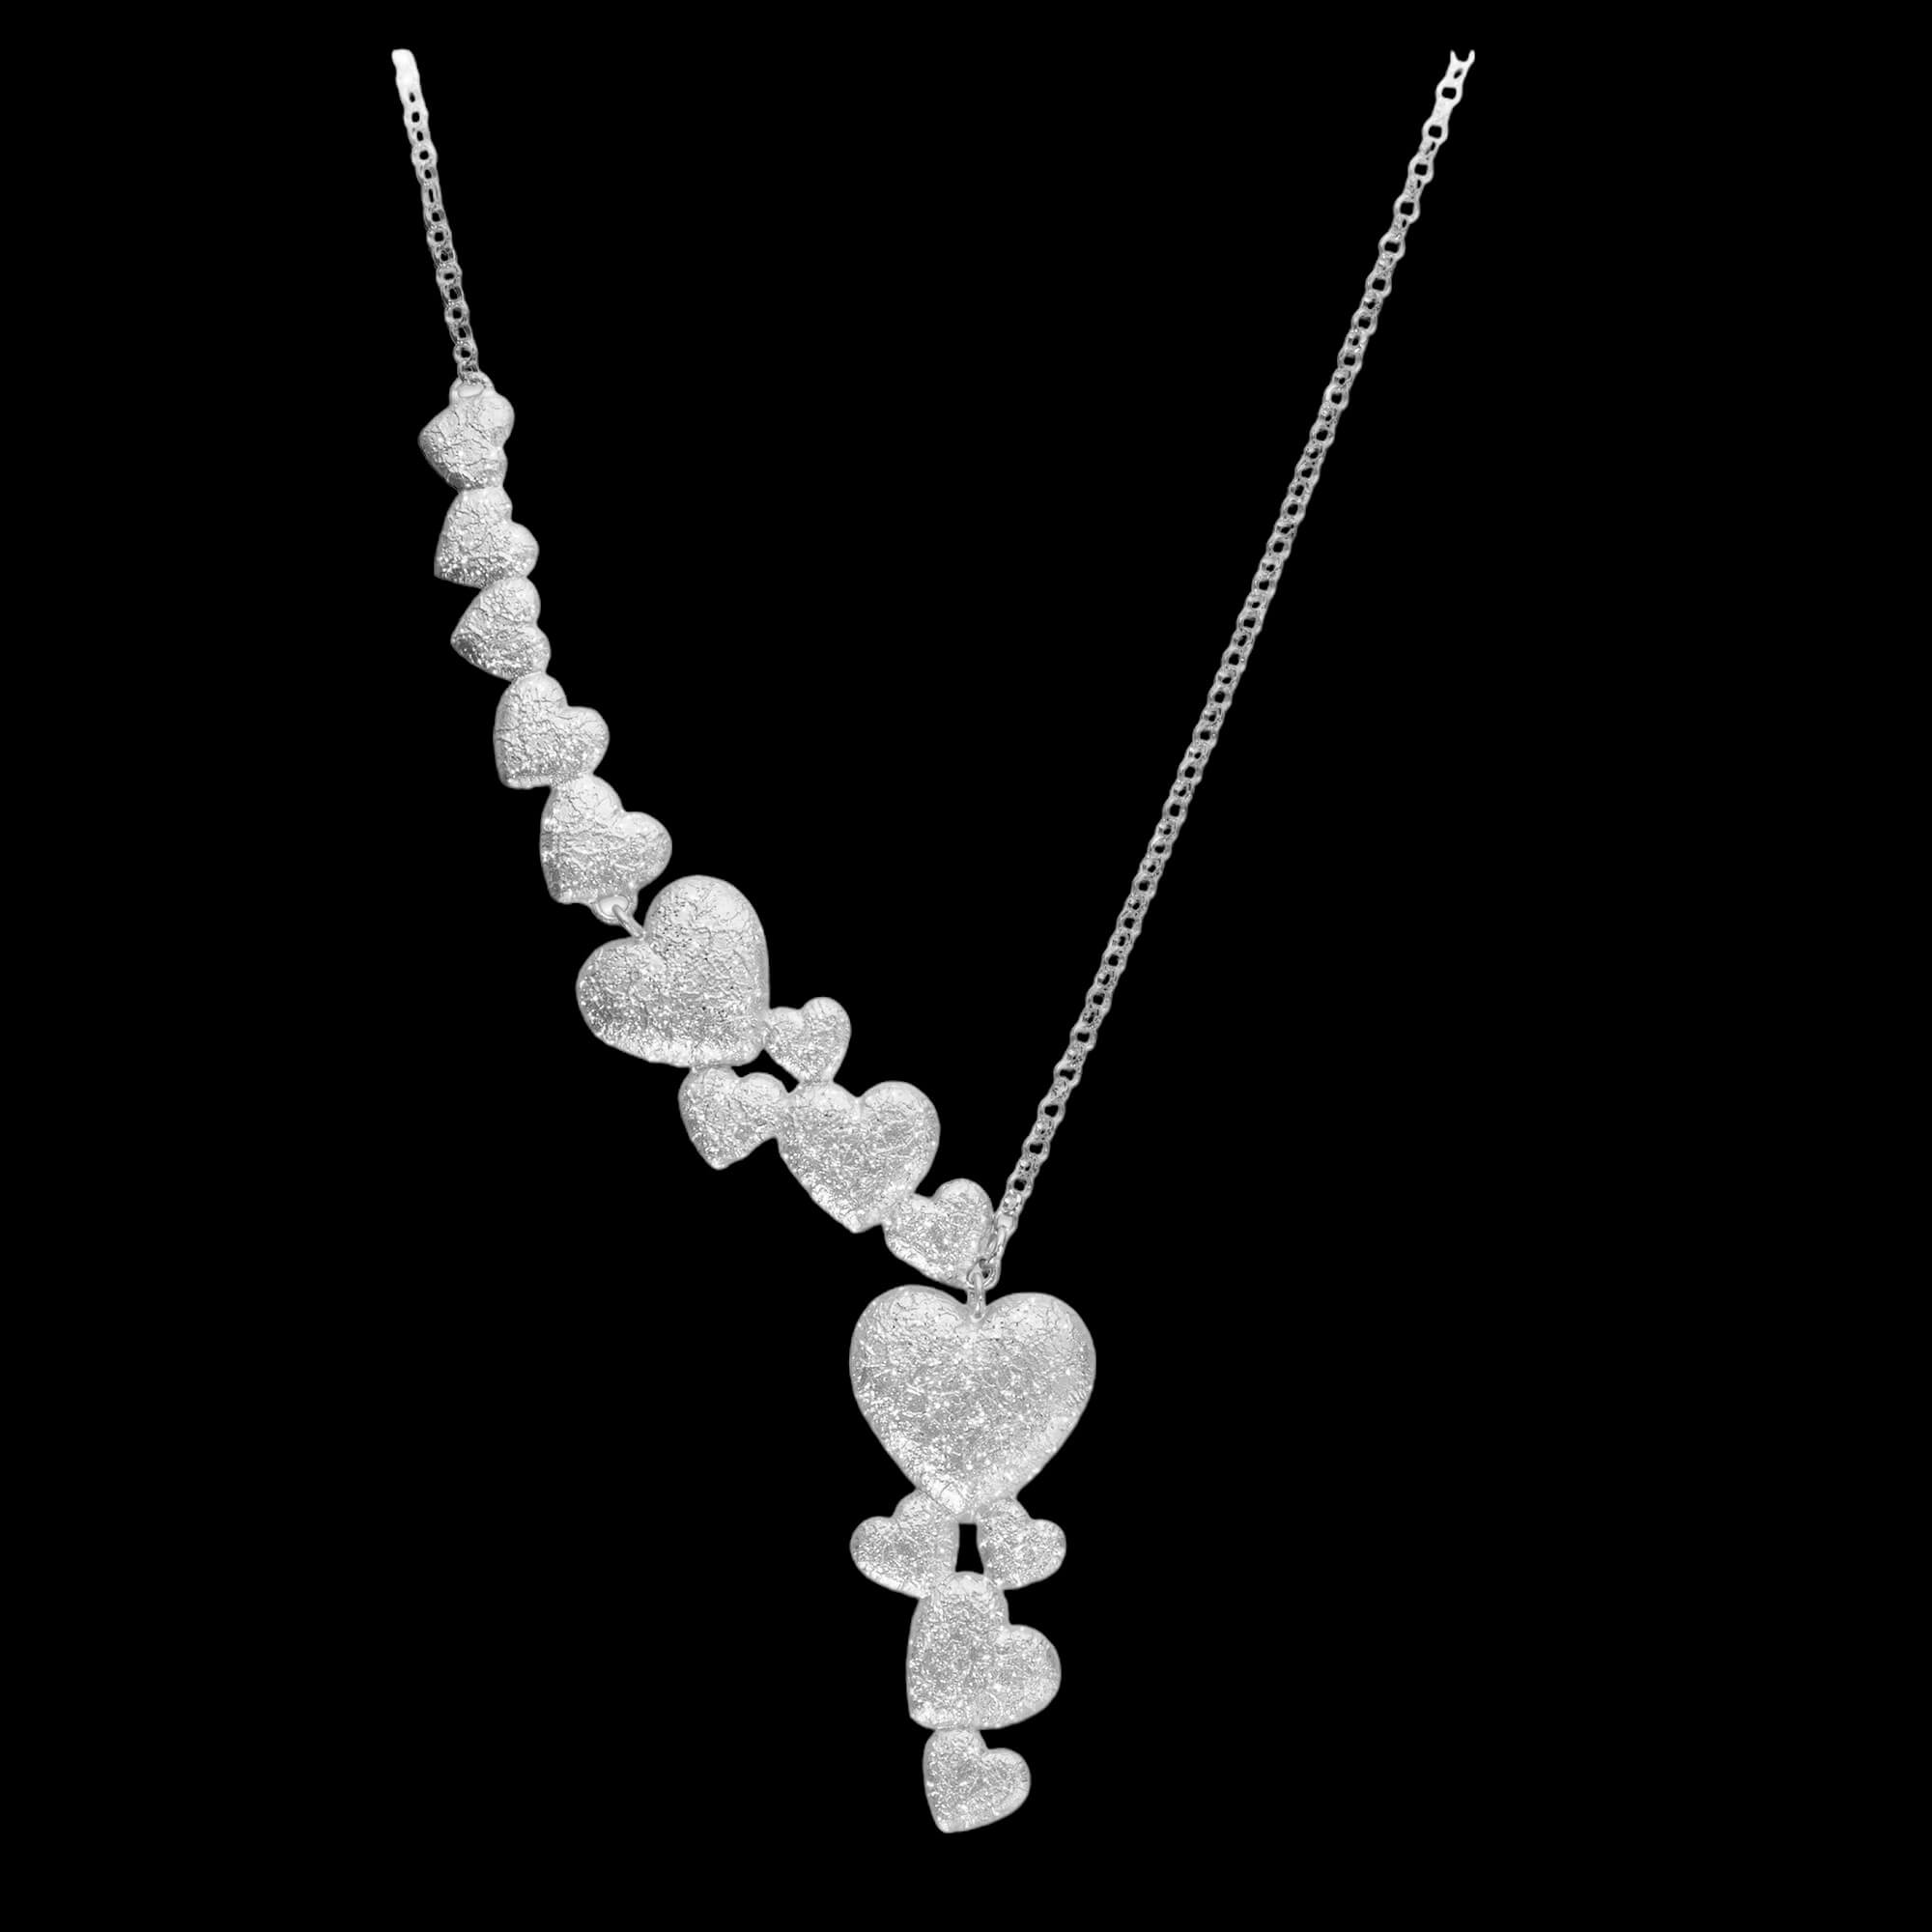 Silver necklace with multiple hearts